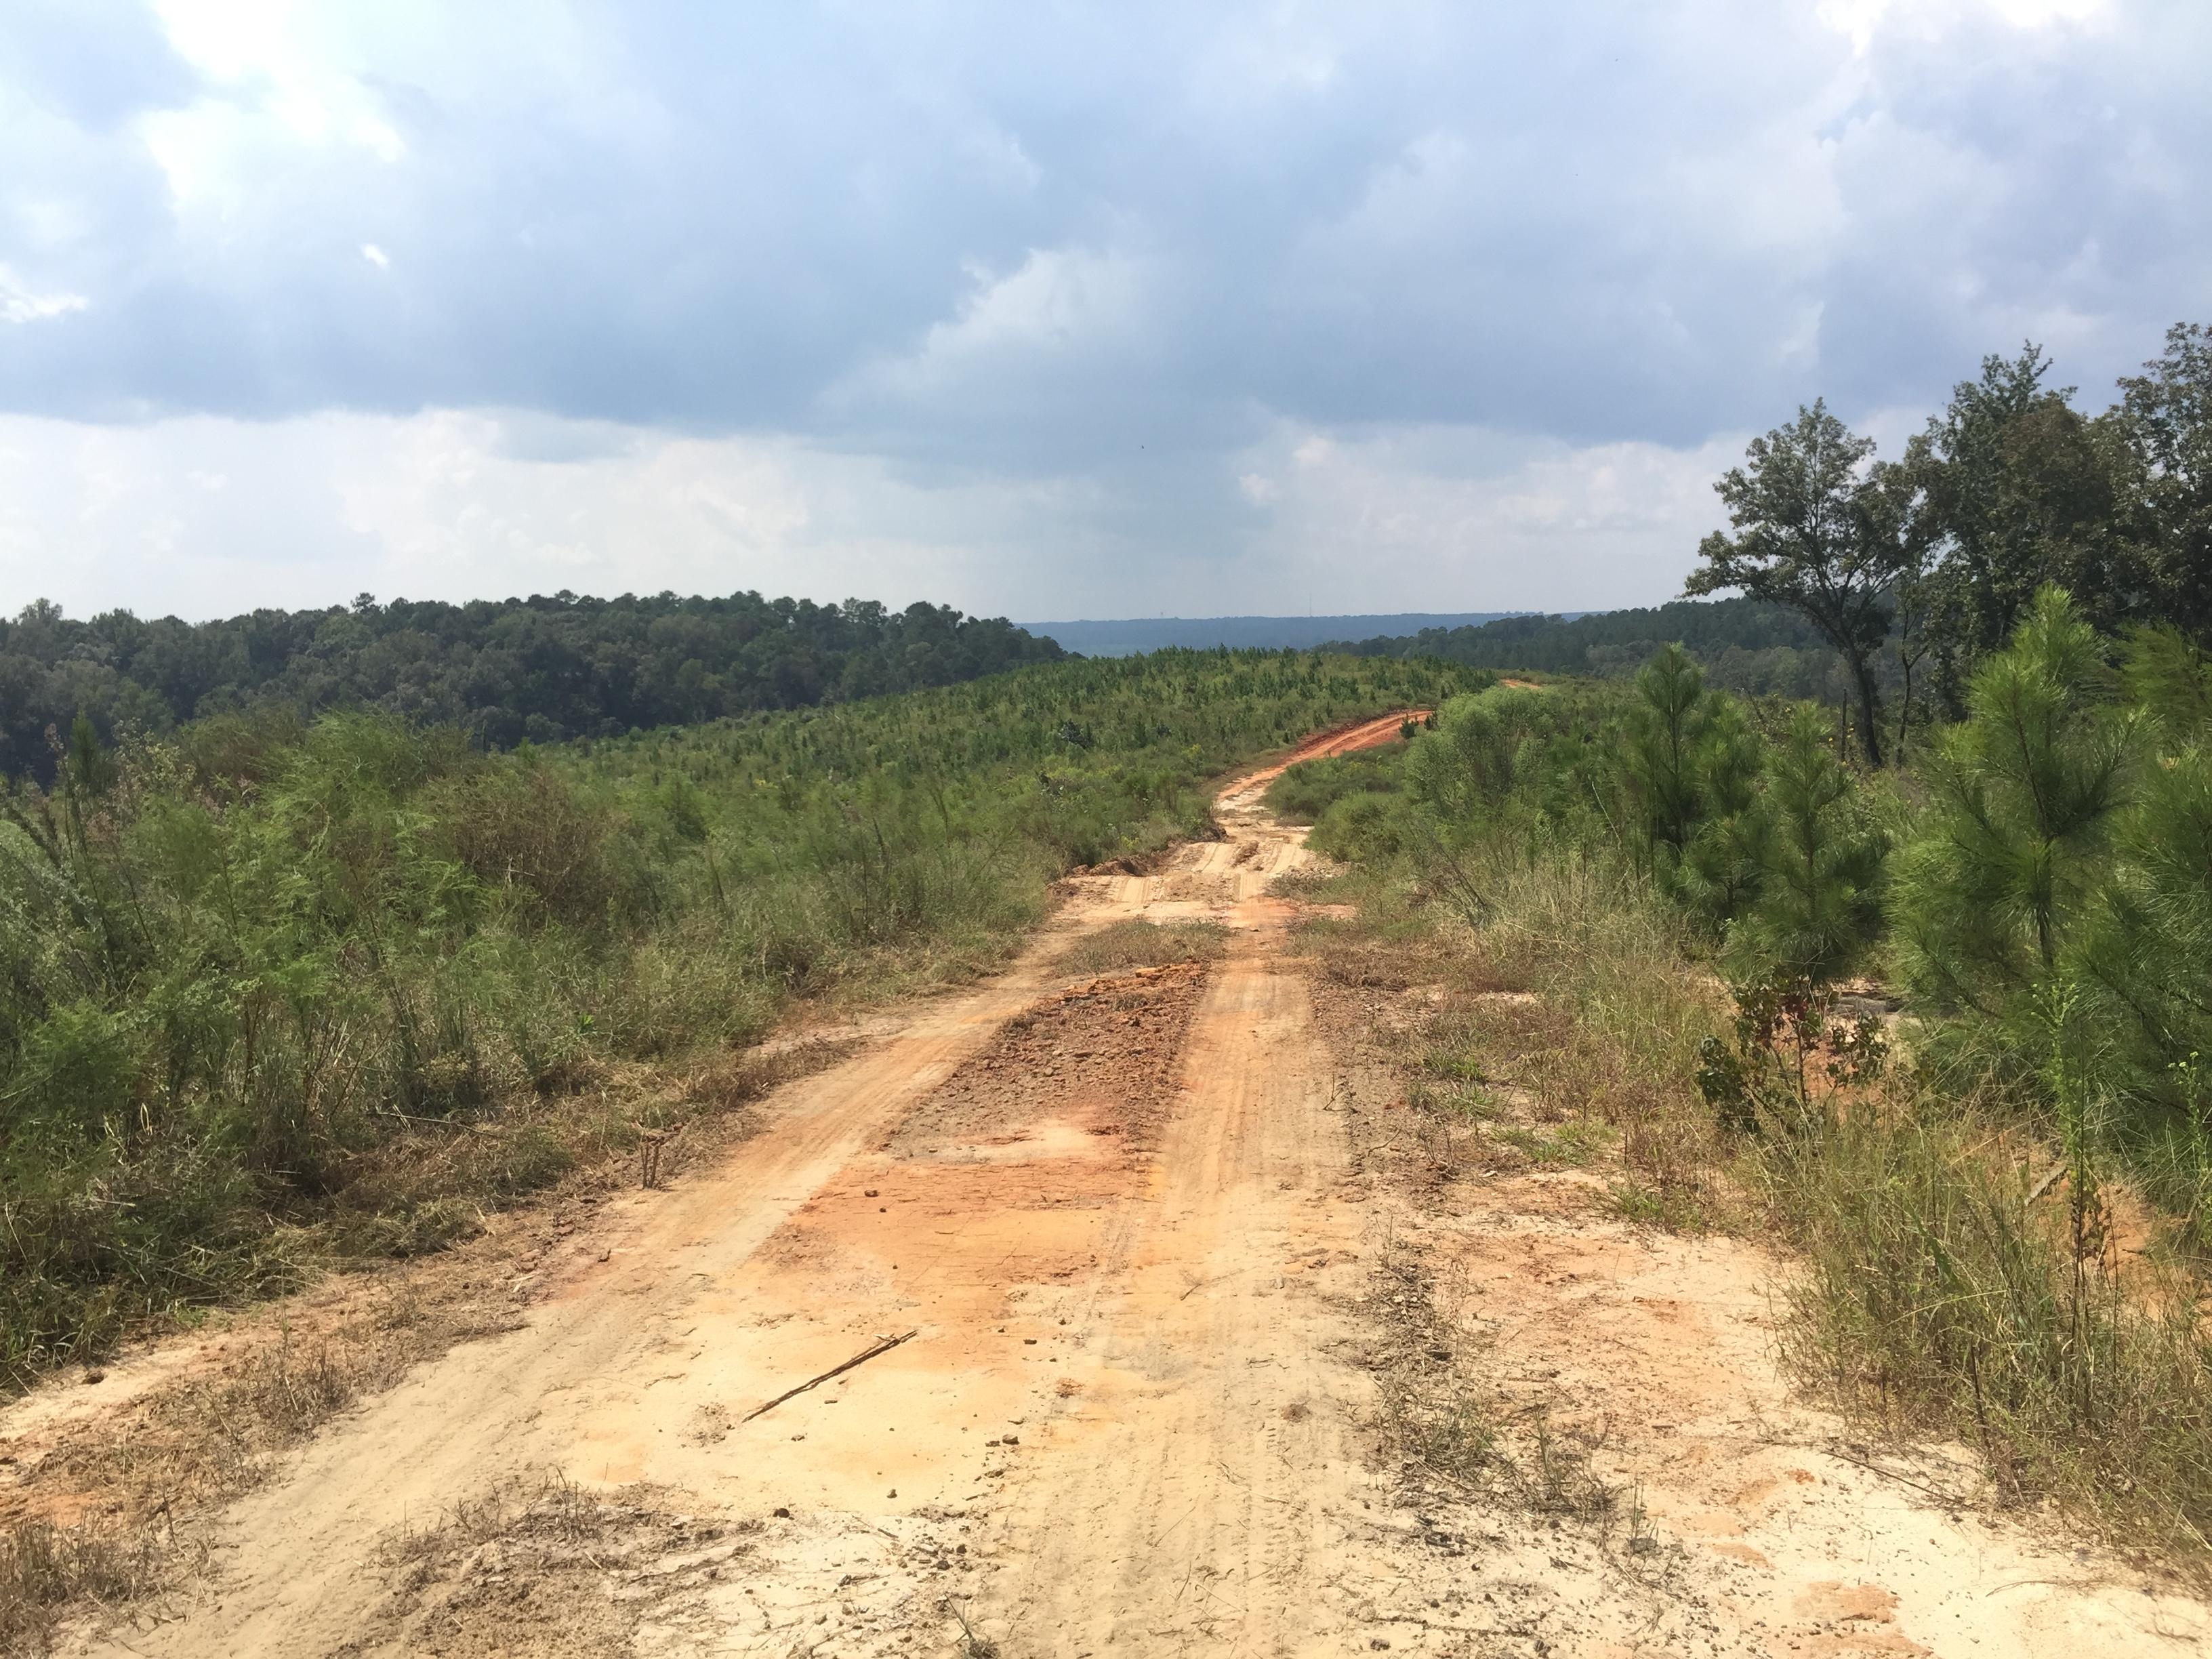 PROPERTY #2 - 268 TOTAL ACRES - CLAY COUNTY, GA